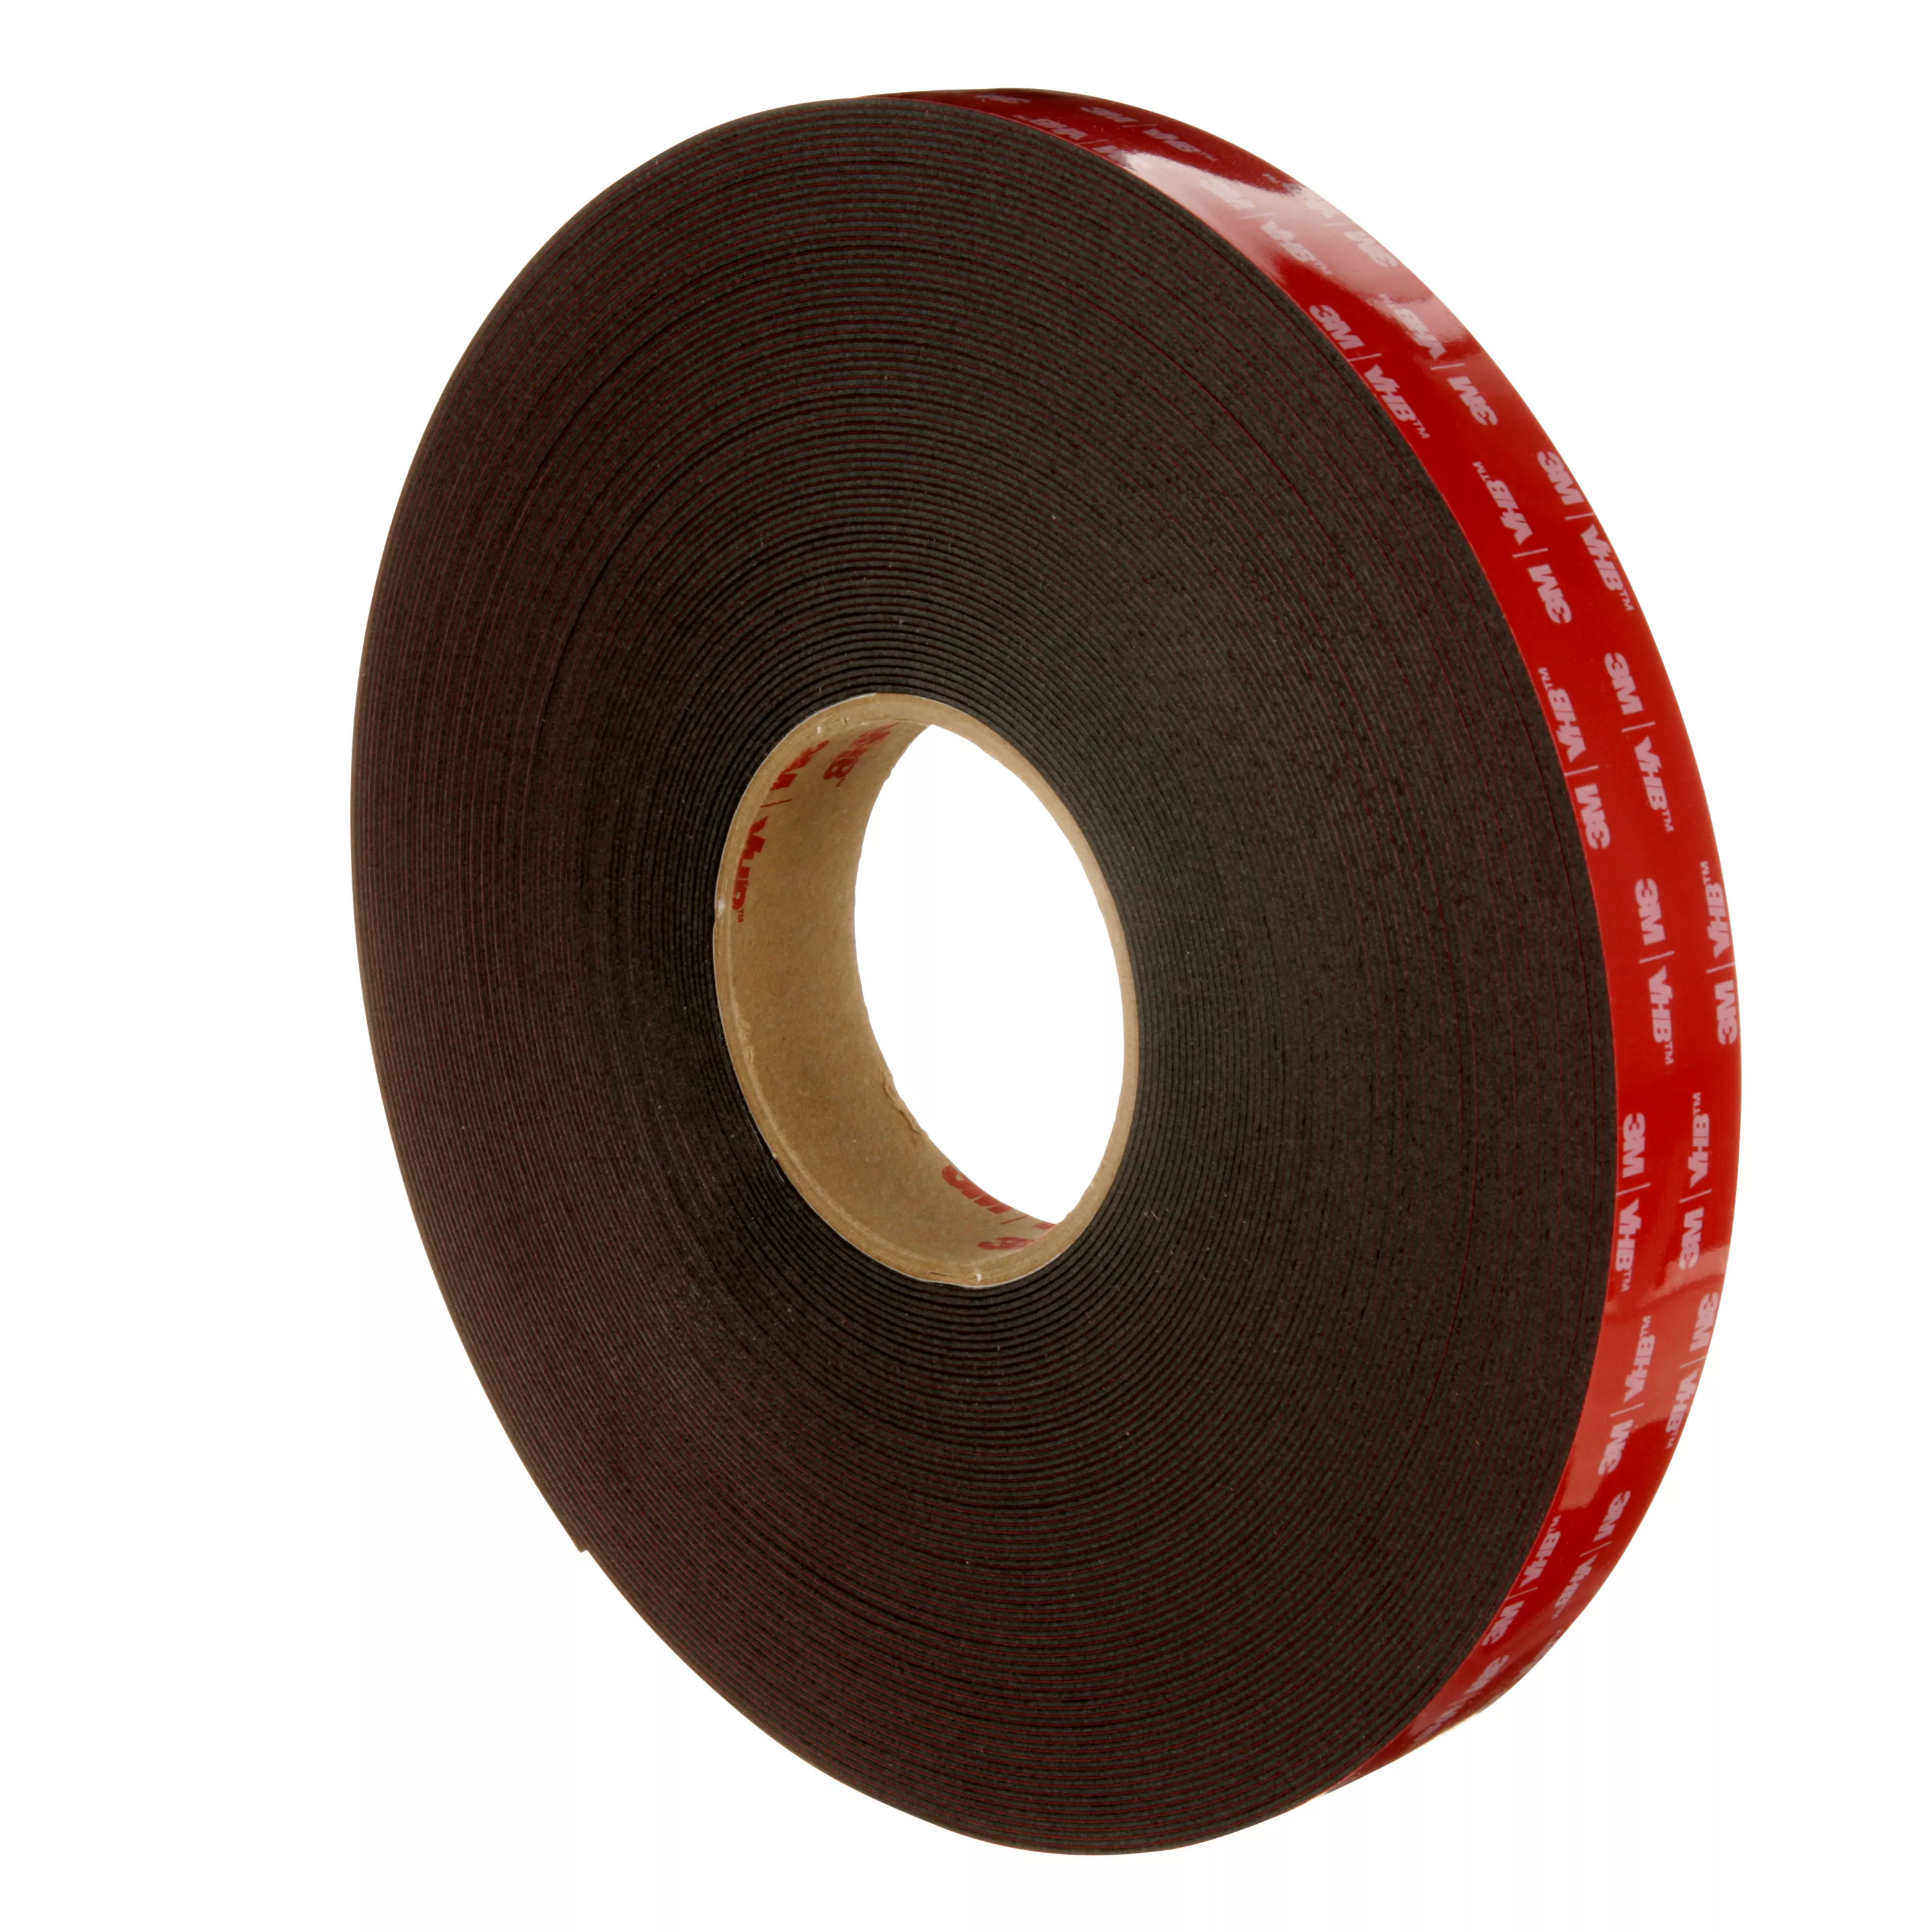 Product Number 5915 | 3M™ VHB™ Tape 5915